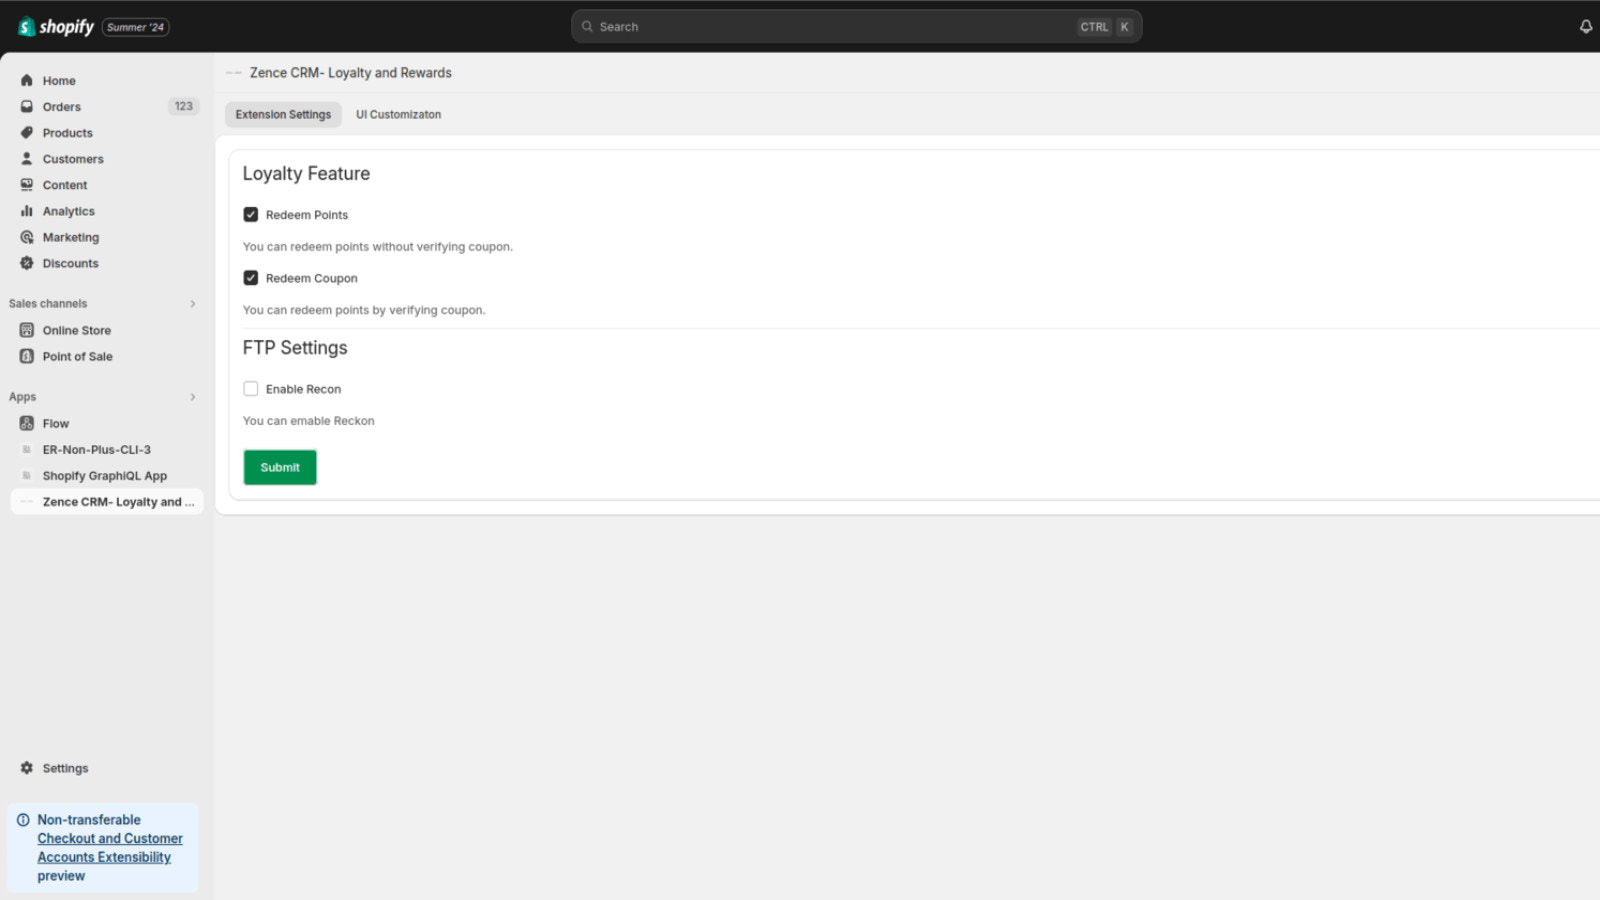 Admin pannel to set up and customize the options for your users 